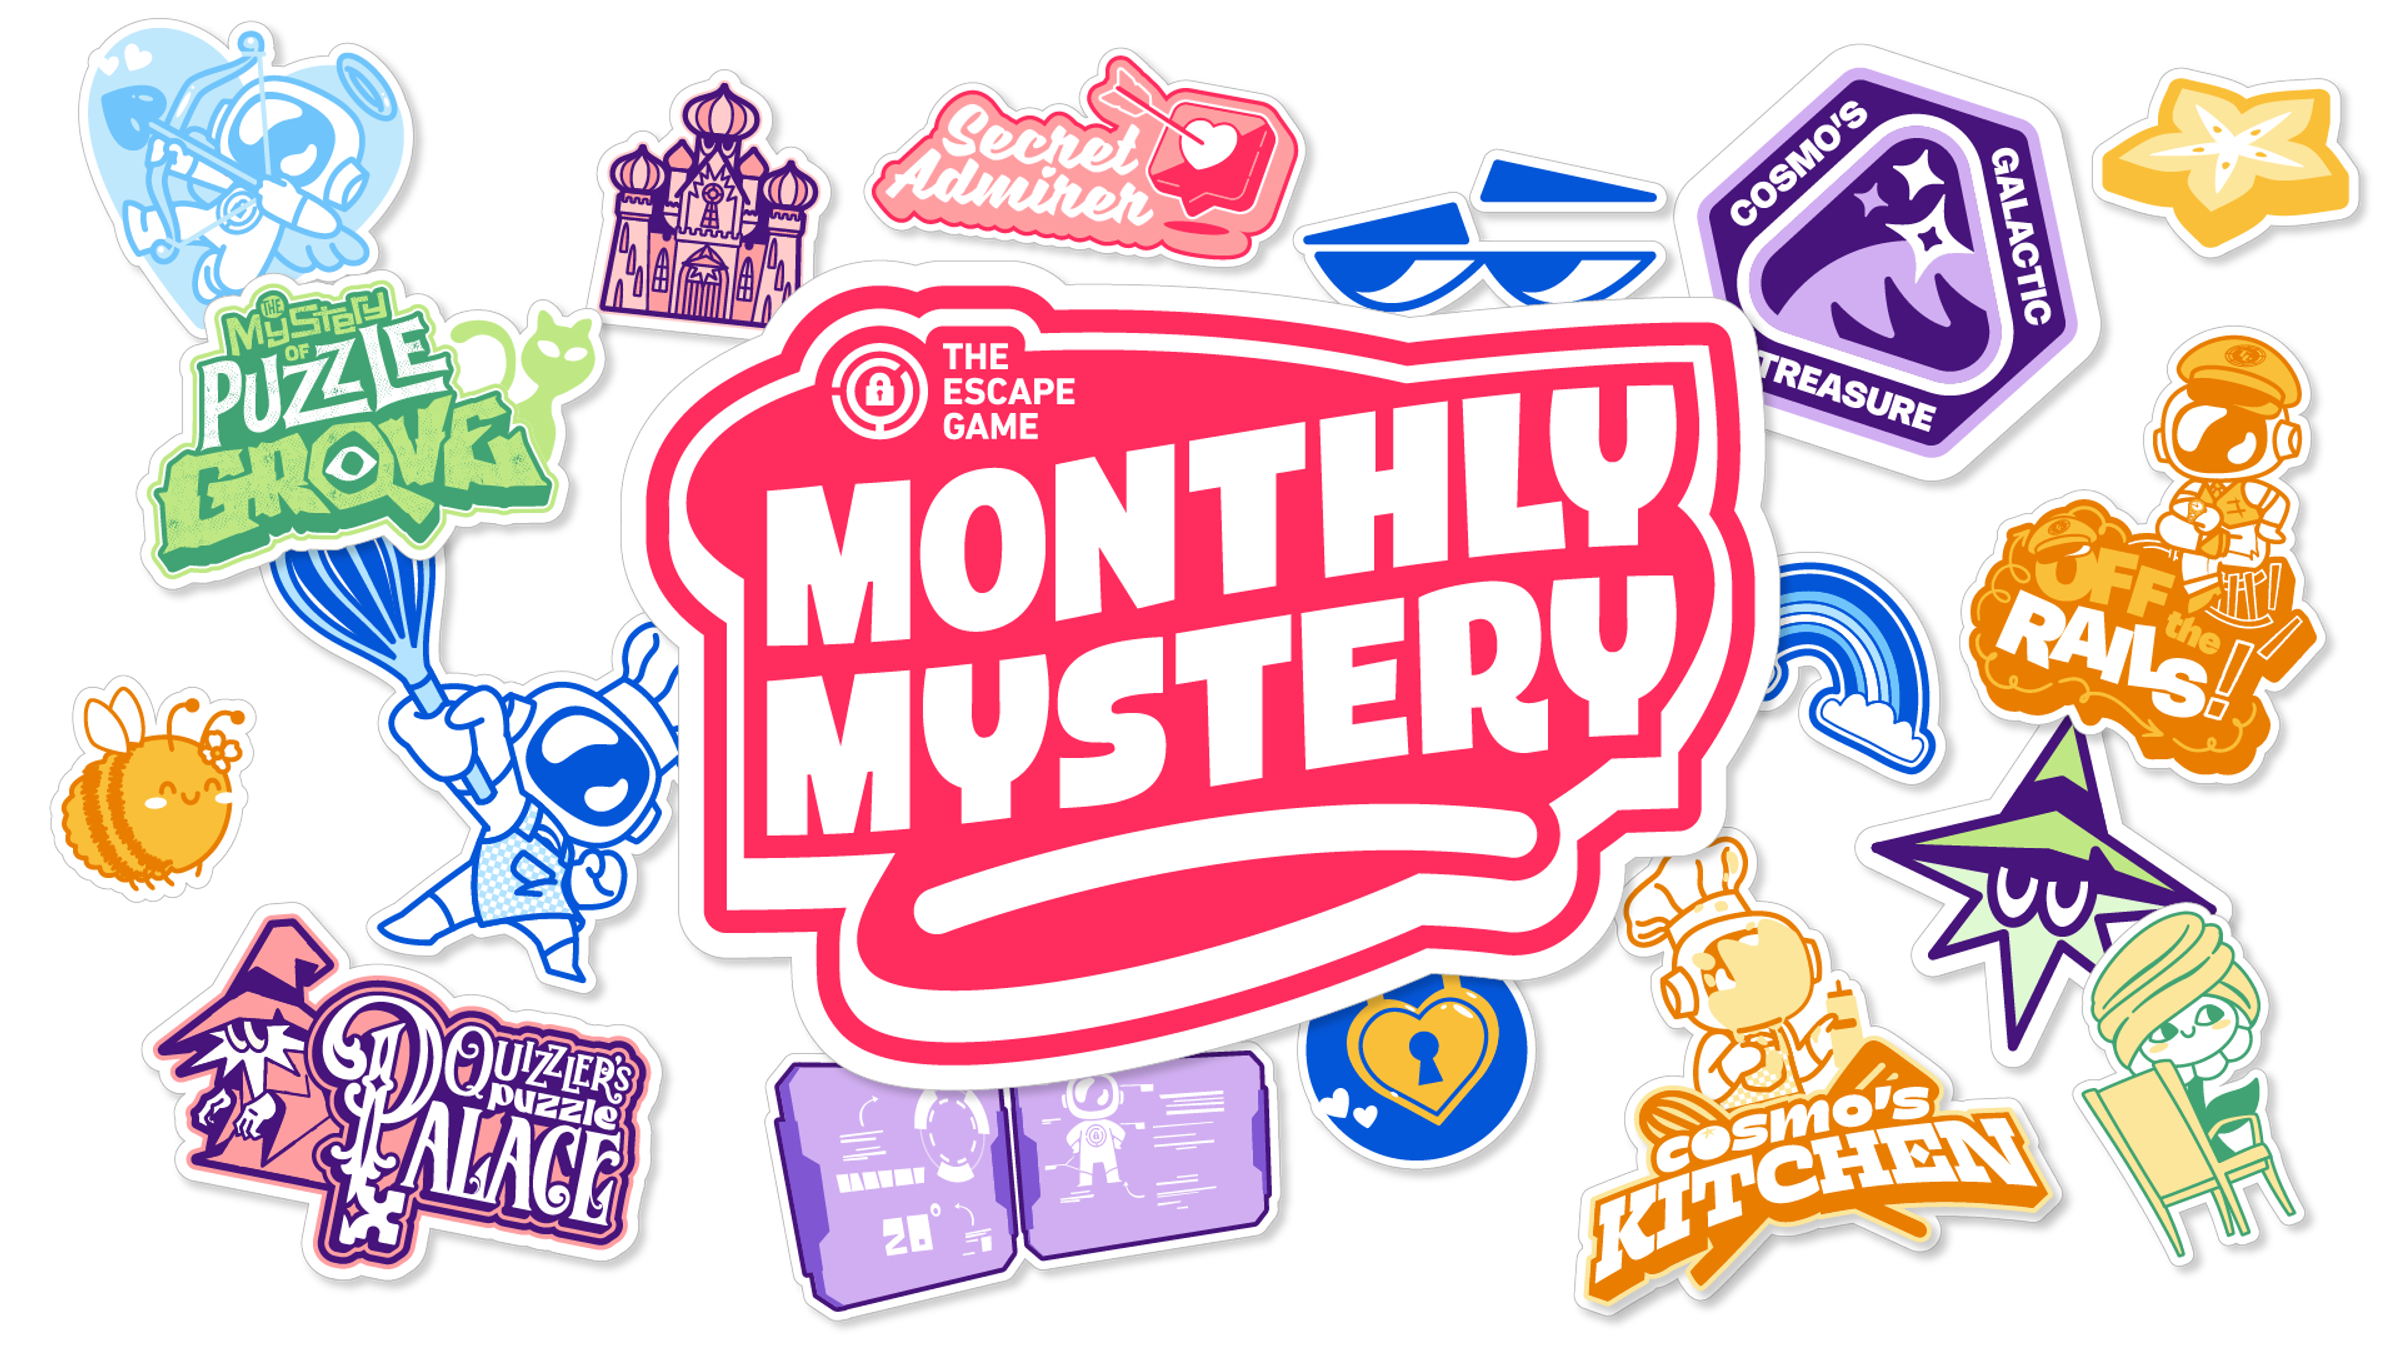 Monthly Mystery by The Escape Game